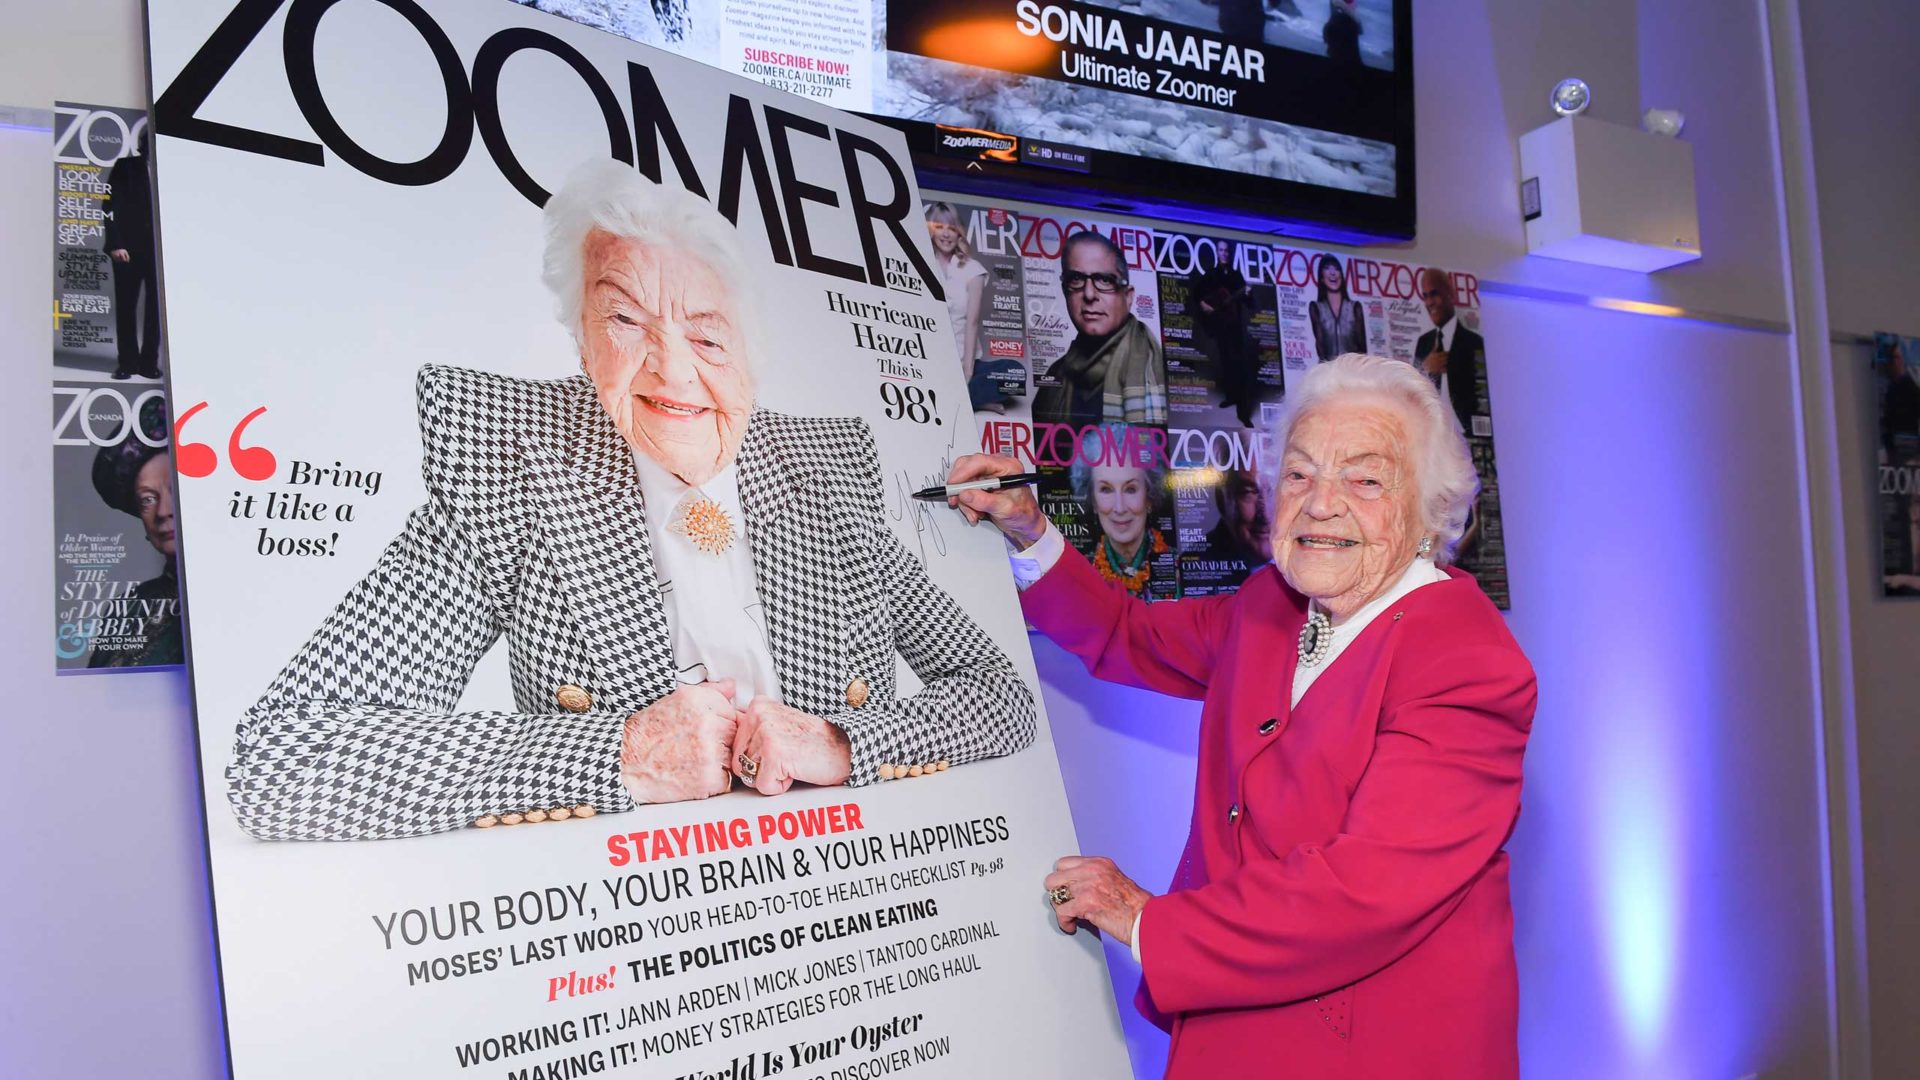 Hazel McCallion signs Zoomer Magazine Cover May 2019 issue. Photo by George Pimentel